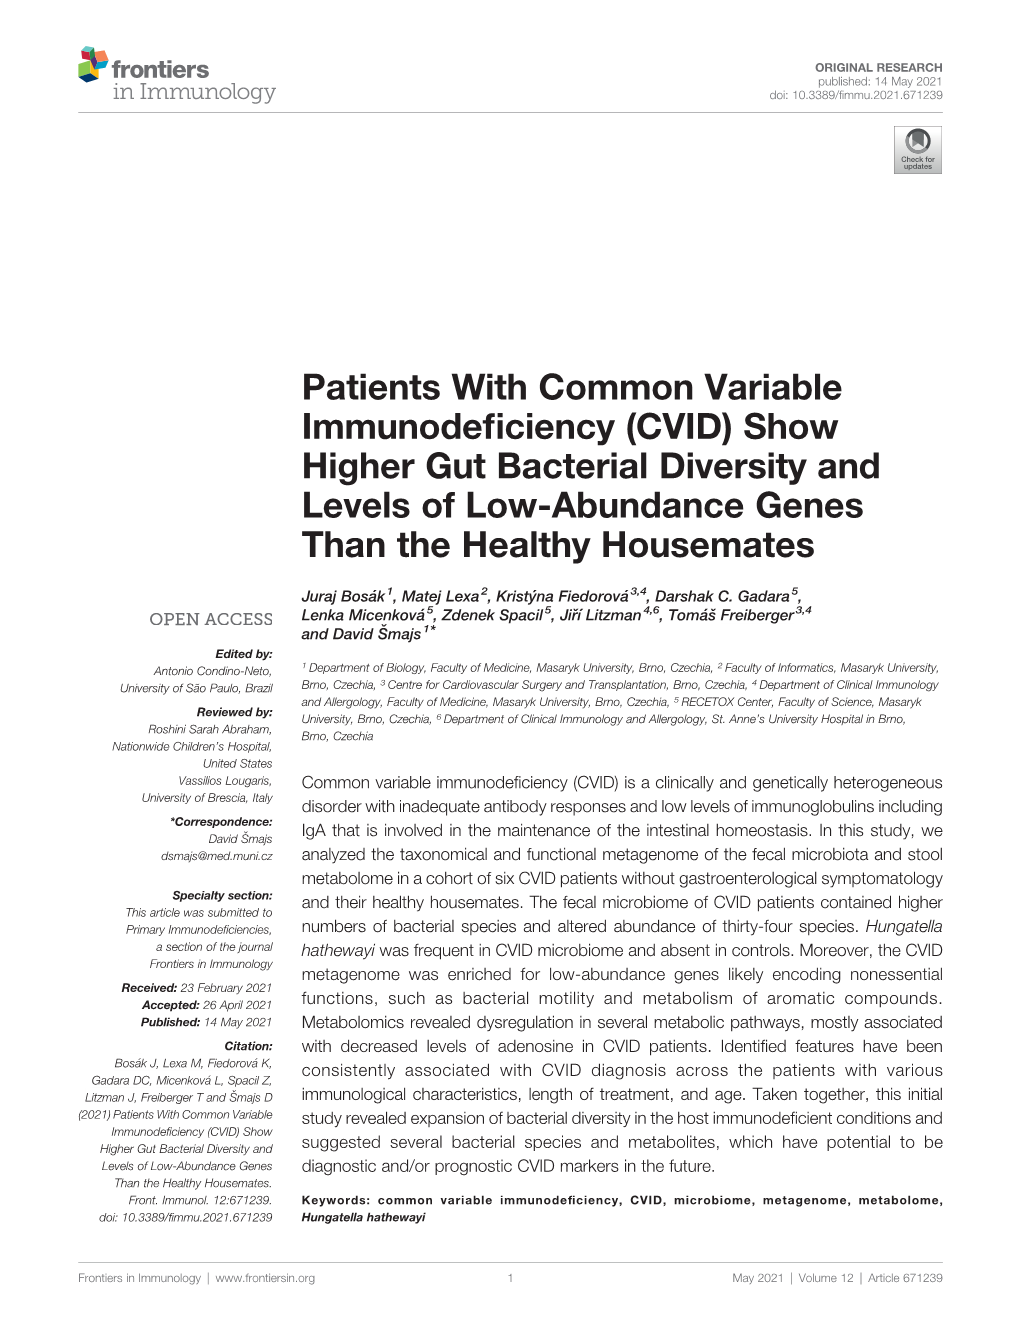 Patients with Common Variable Immunodeficiency (CVID)